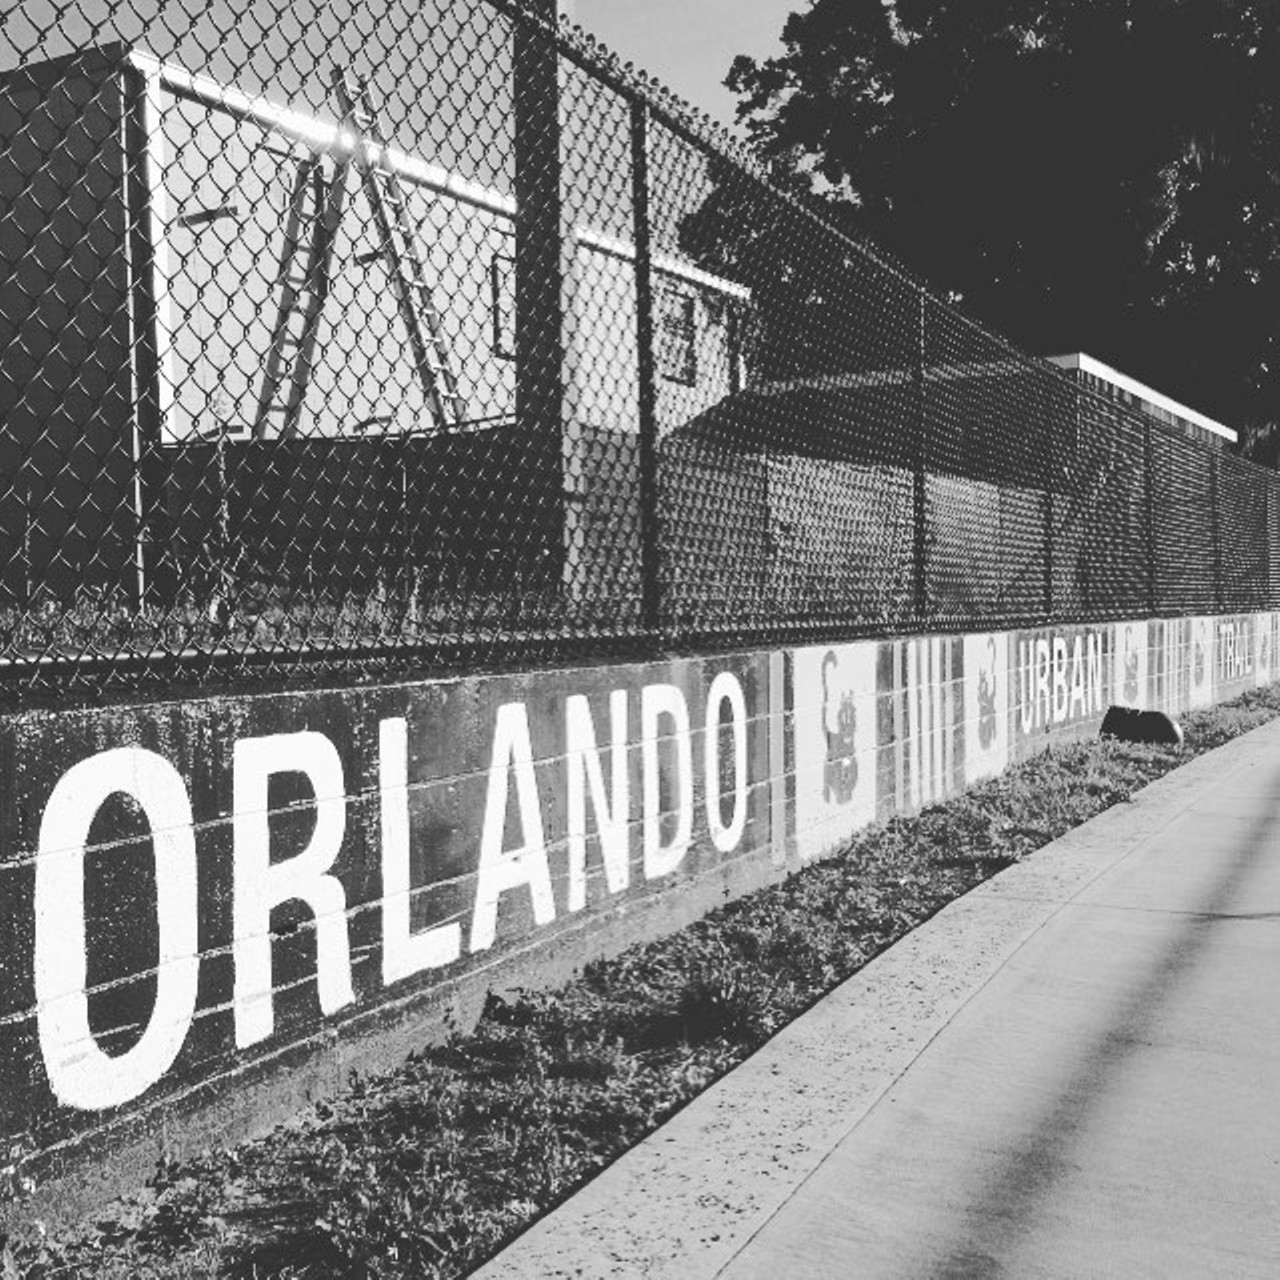 Orlando Urban Trail
Located in Downtown Orlando, this 2.6 mile trail is perfect for wildlife watching as it passes by several lakes. It ends at Loch Haven Park, which has the Orlando Science Center, the Orlando Museum of Art and the Orlando Shakespeare Theater.
Photo via Orlando Weekly/Instagram